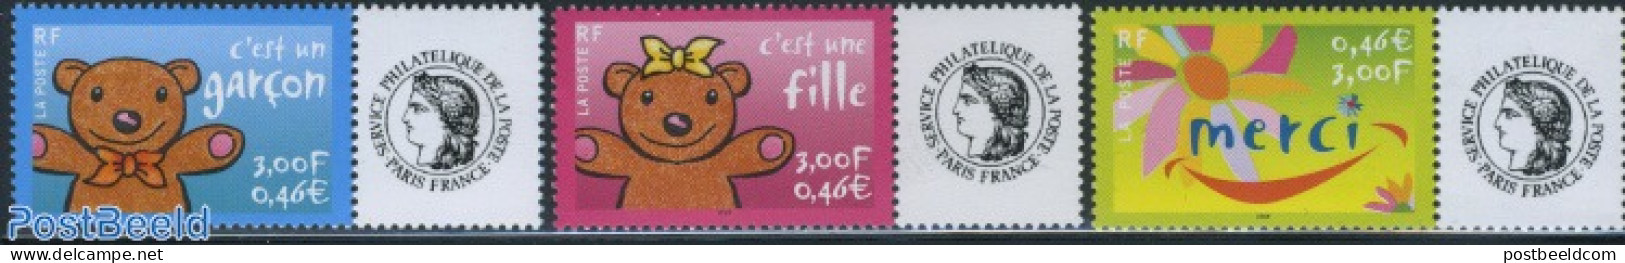 France 2001 Greeting Stamps With Personal Tabs 3v (tabs May Vary), Mint NH, Various - Greetings & Wishing Stamps - Unused Stamps